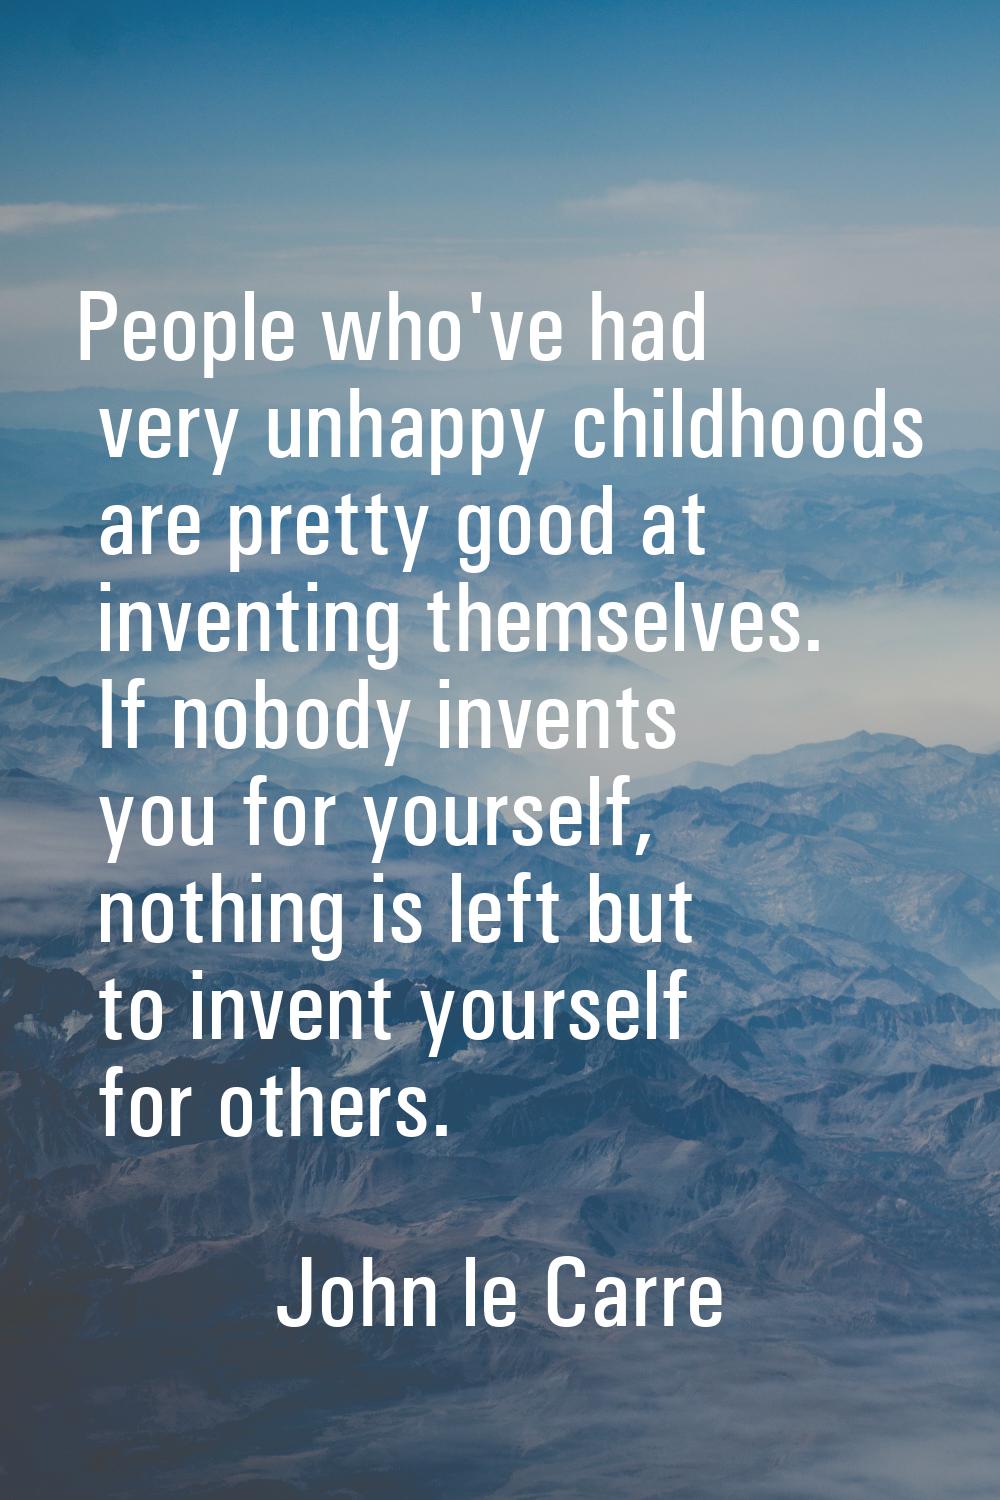 People who've had very unhappy childhoods are pretty good at inventing themselves. If nobody invent